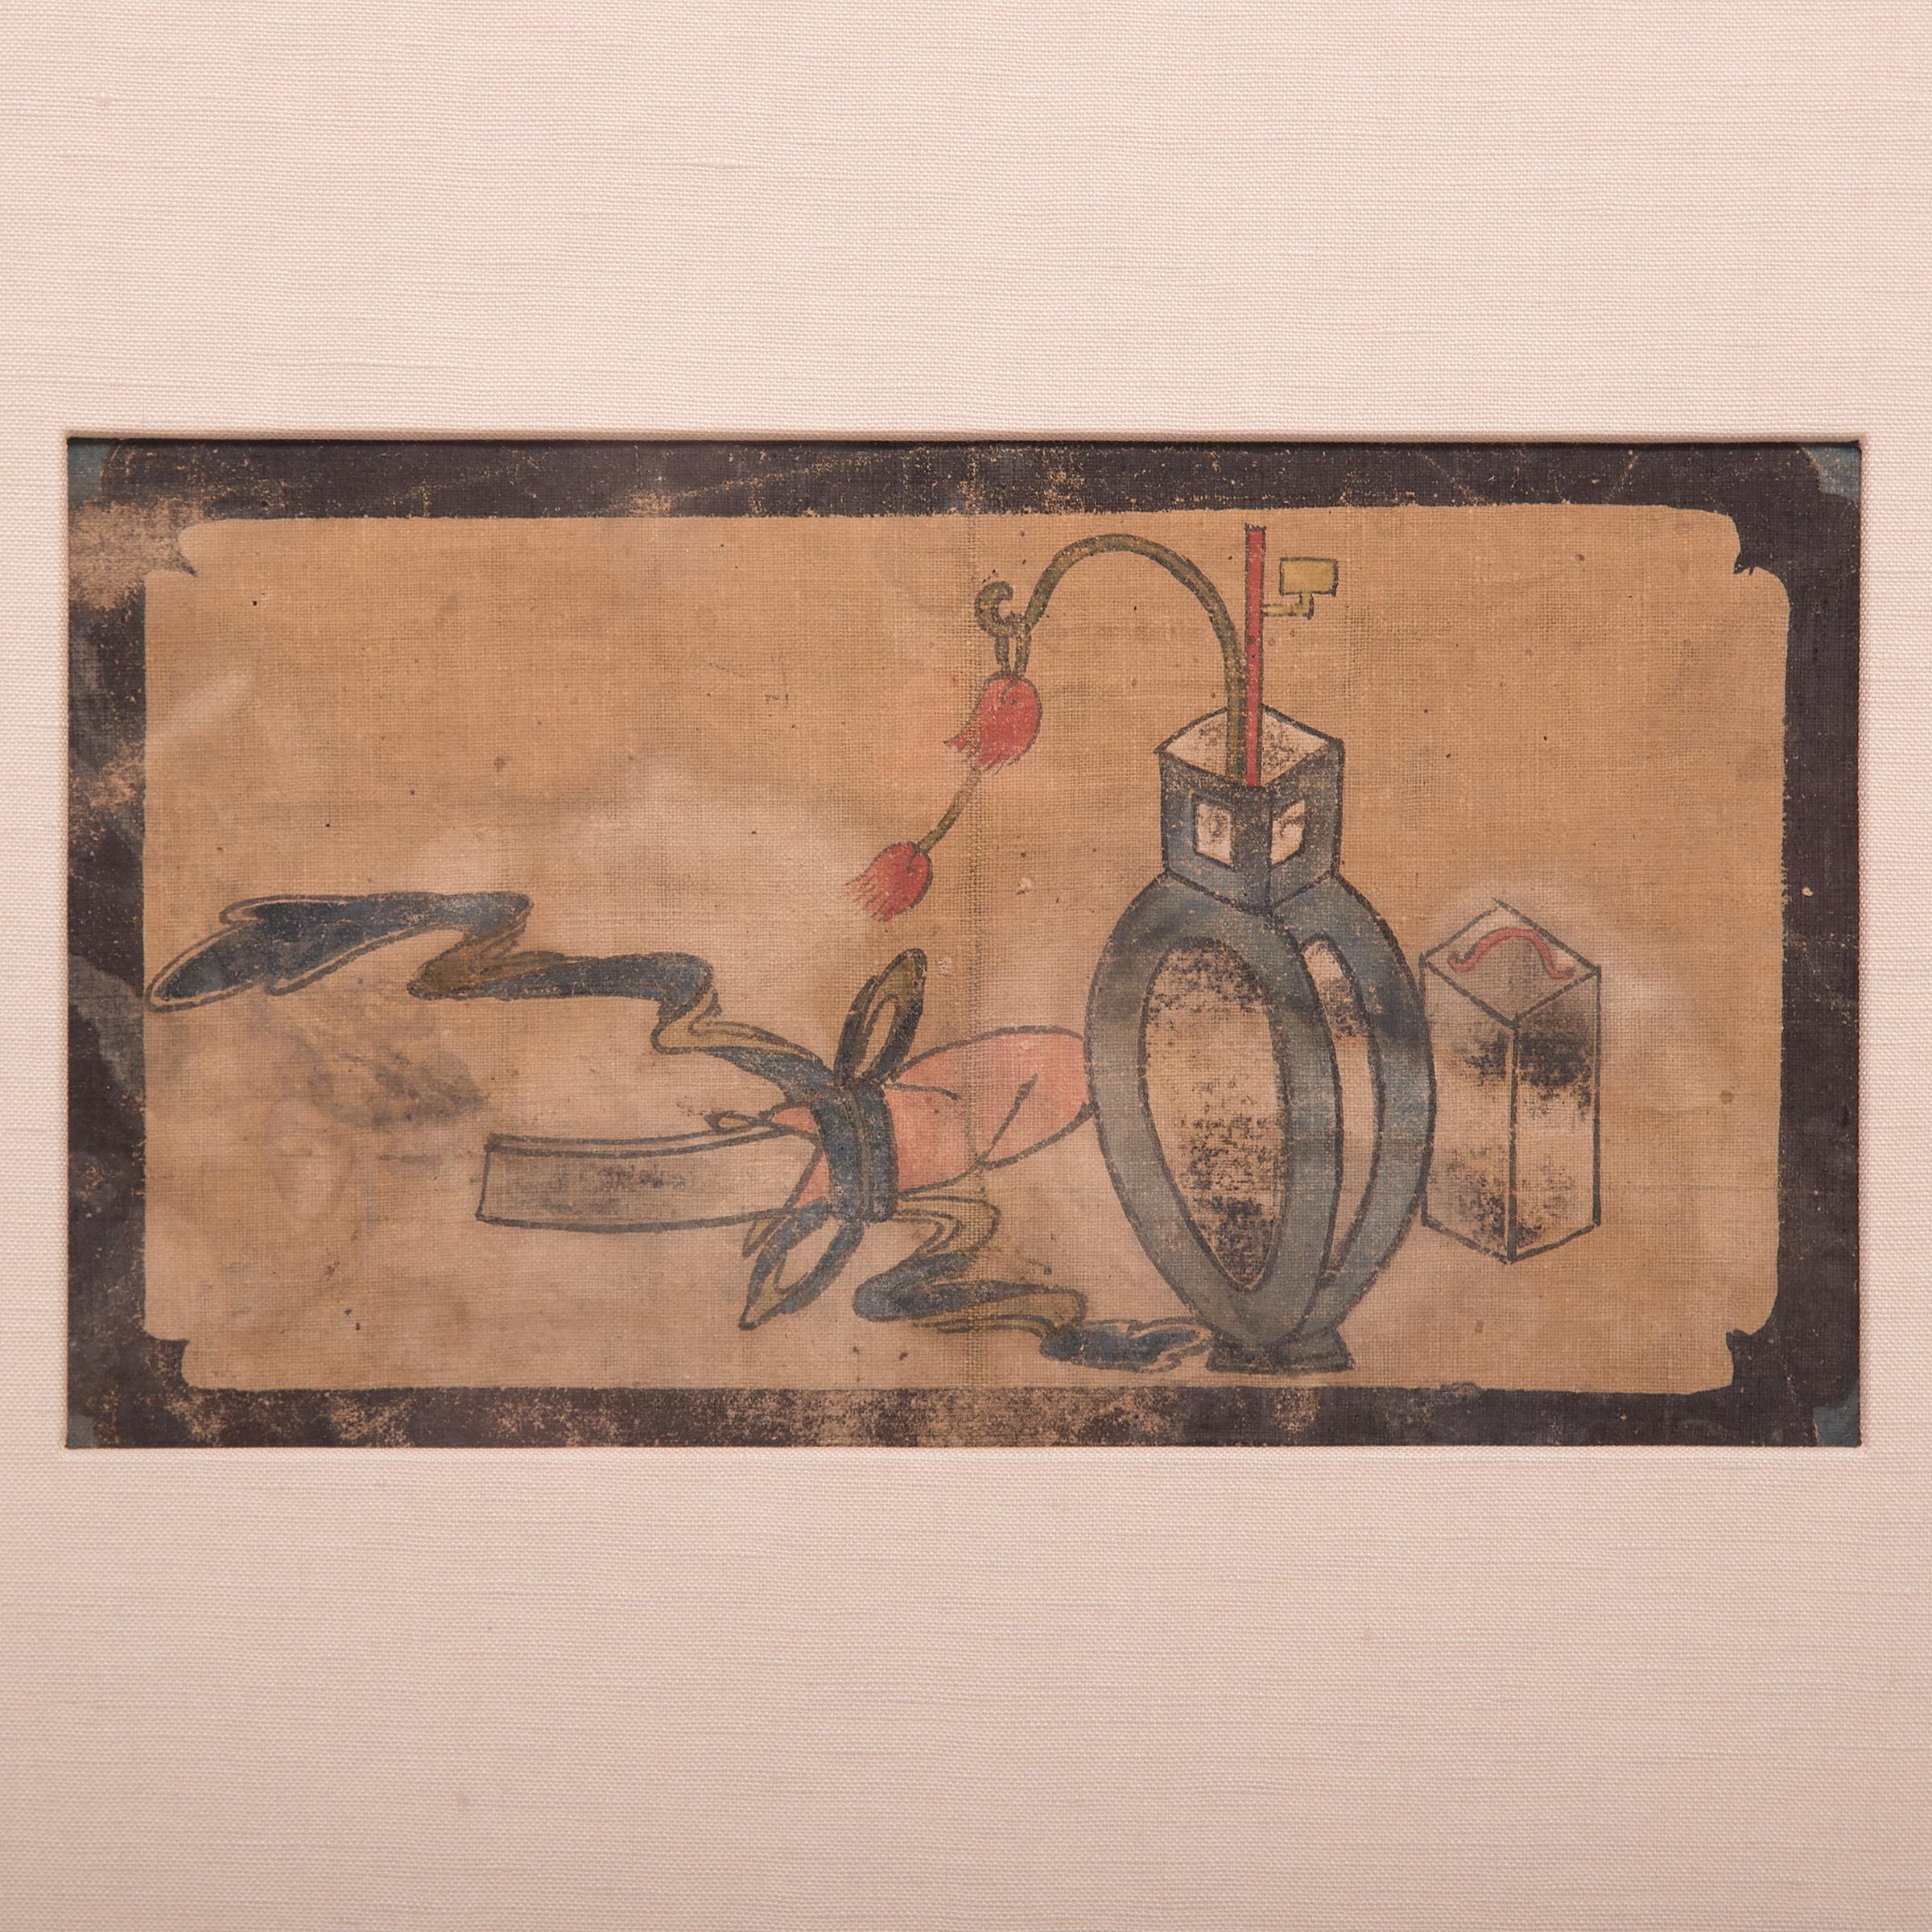 A scroll and a small lantern depicted in this 19th century painting suggest the romantic notion of a Chinese scholar painting in the evening hours. Remarkably vivid, this painting was originally part of a series of paintings paying tribute to the